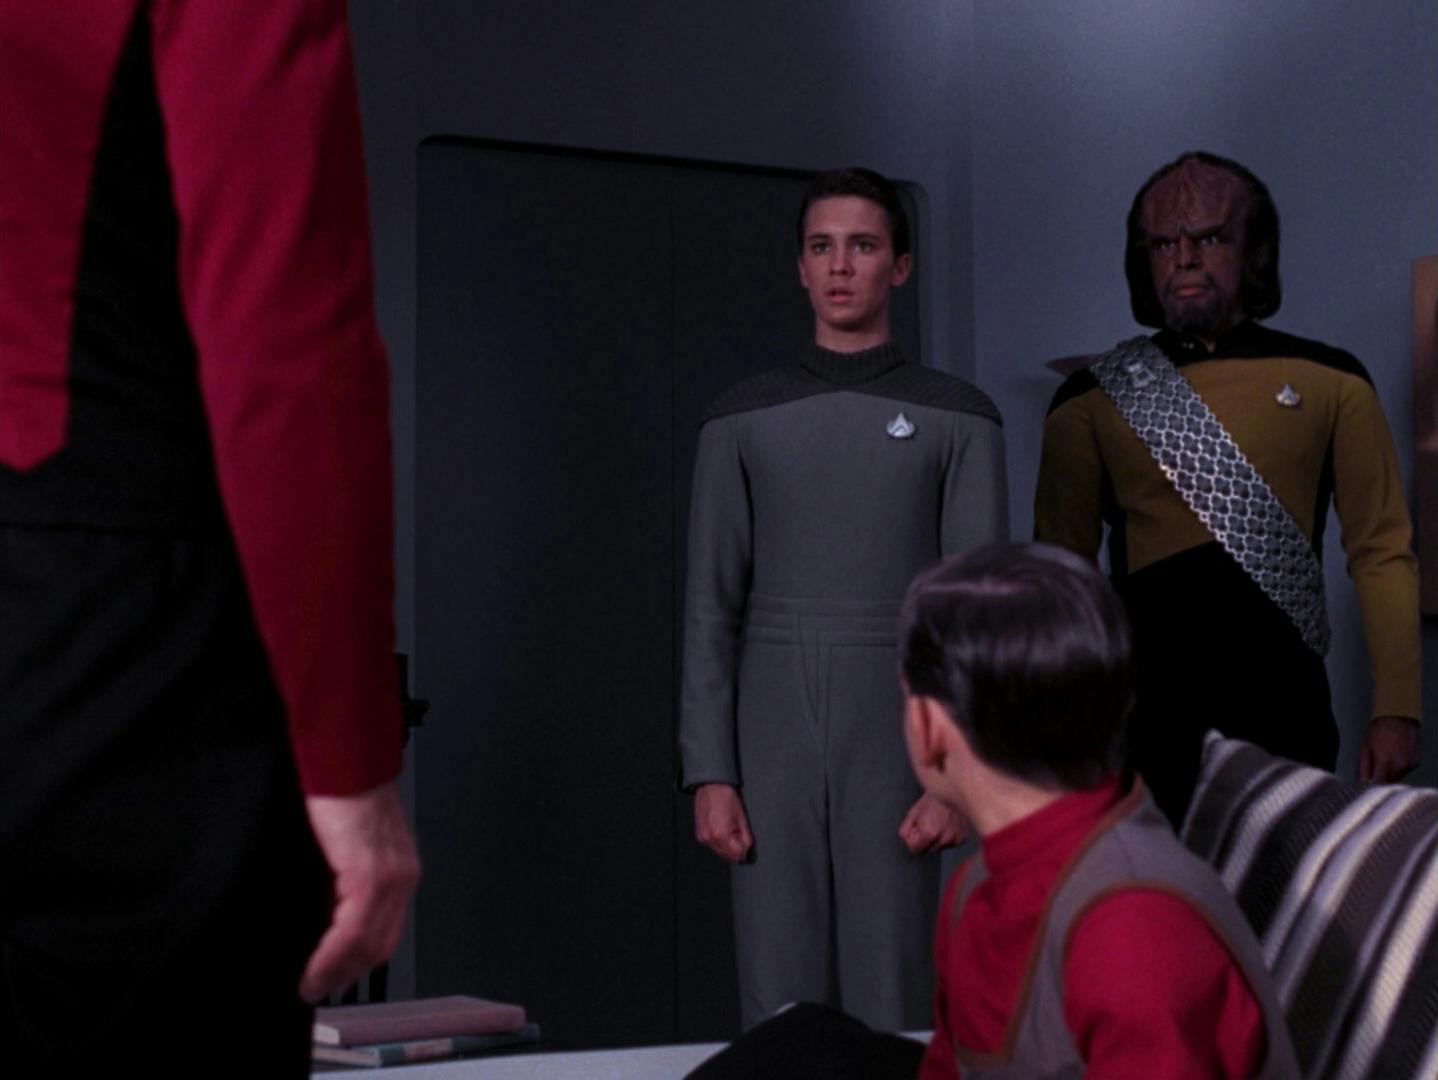 In the Asters' quarters, Worf and Wesley approach a standing Jean-Luc Picard and seated Jeremy Aster as young Crusher confronts the captain about his long-held resentment in 'The Bonding'